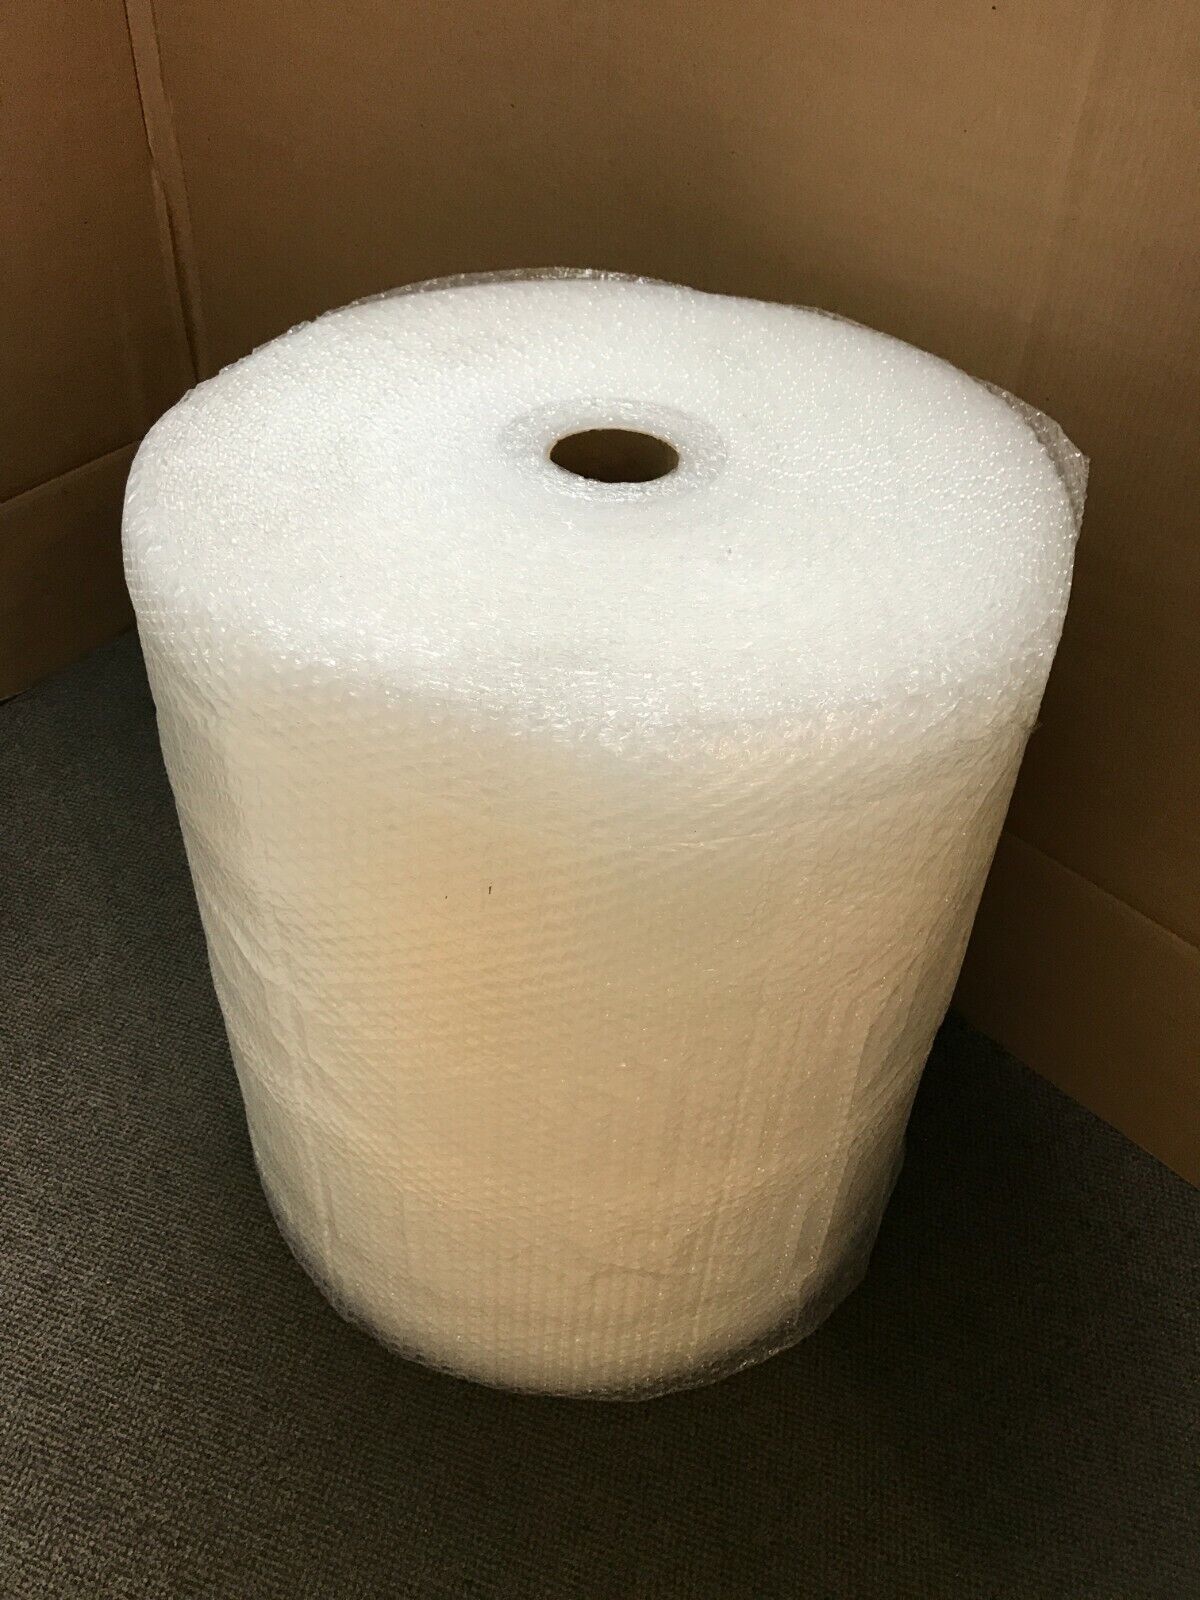 3/16"x 24" Small Bubbles Packing Wrap Perforated 350ft bubble Mailing / Shipping